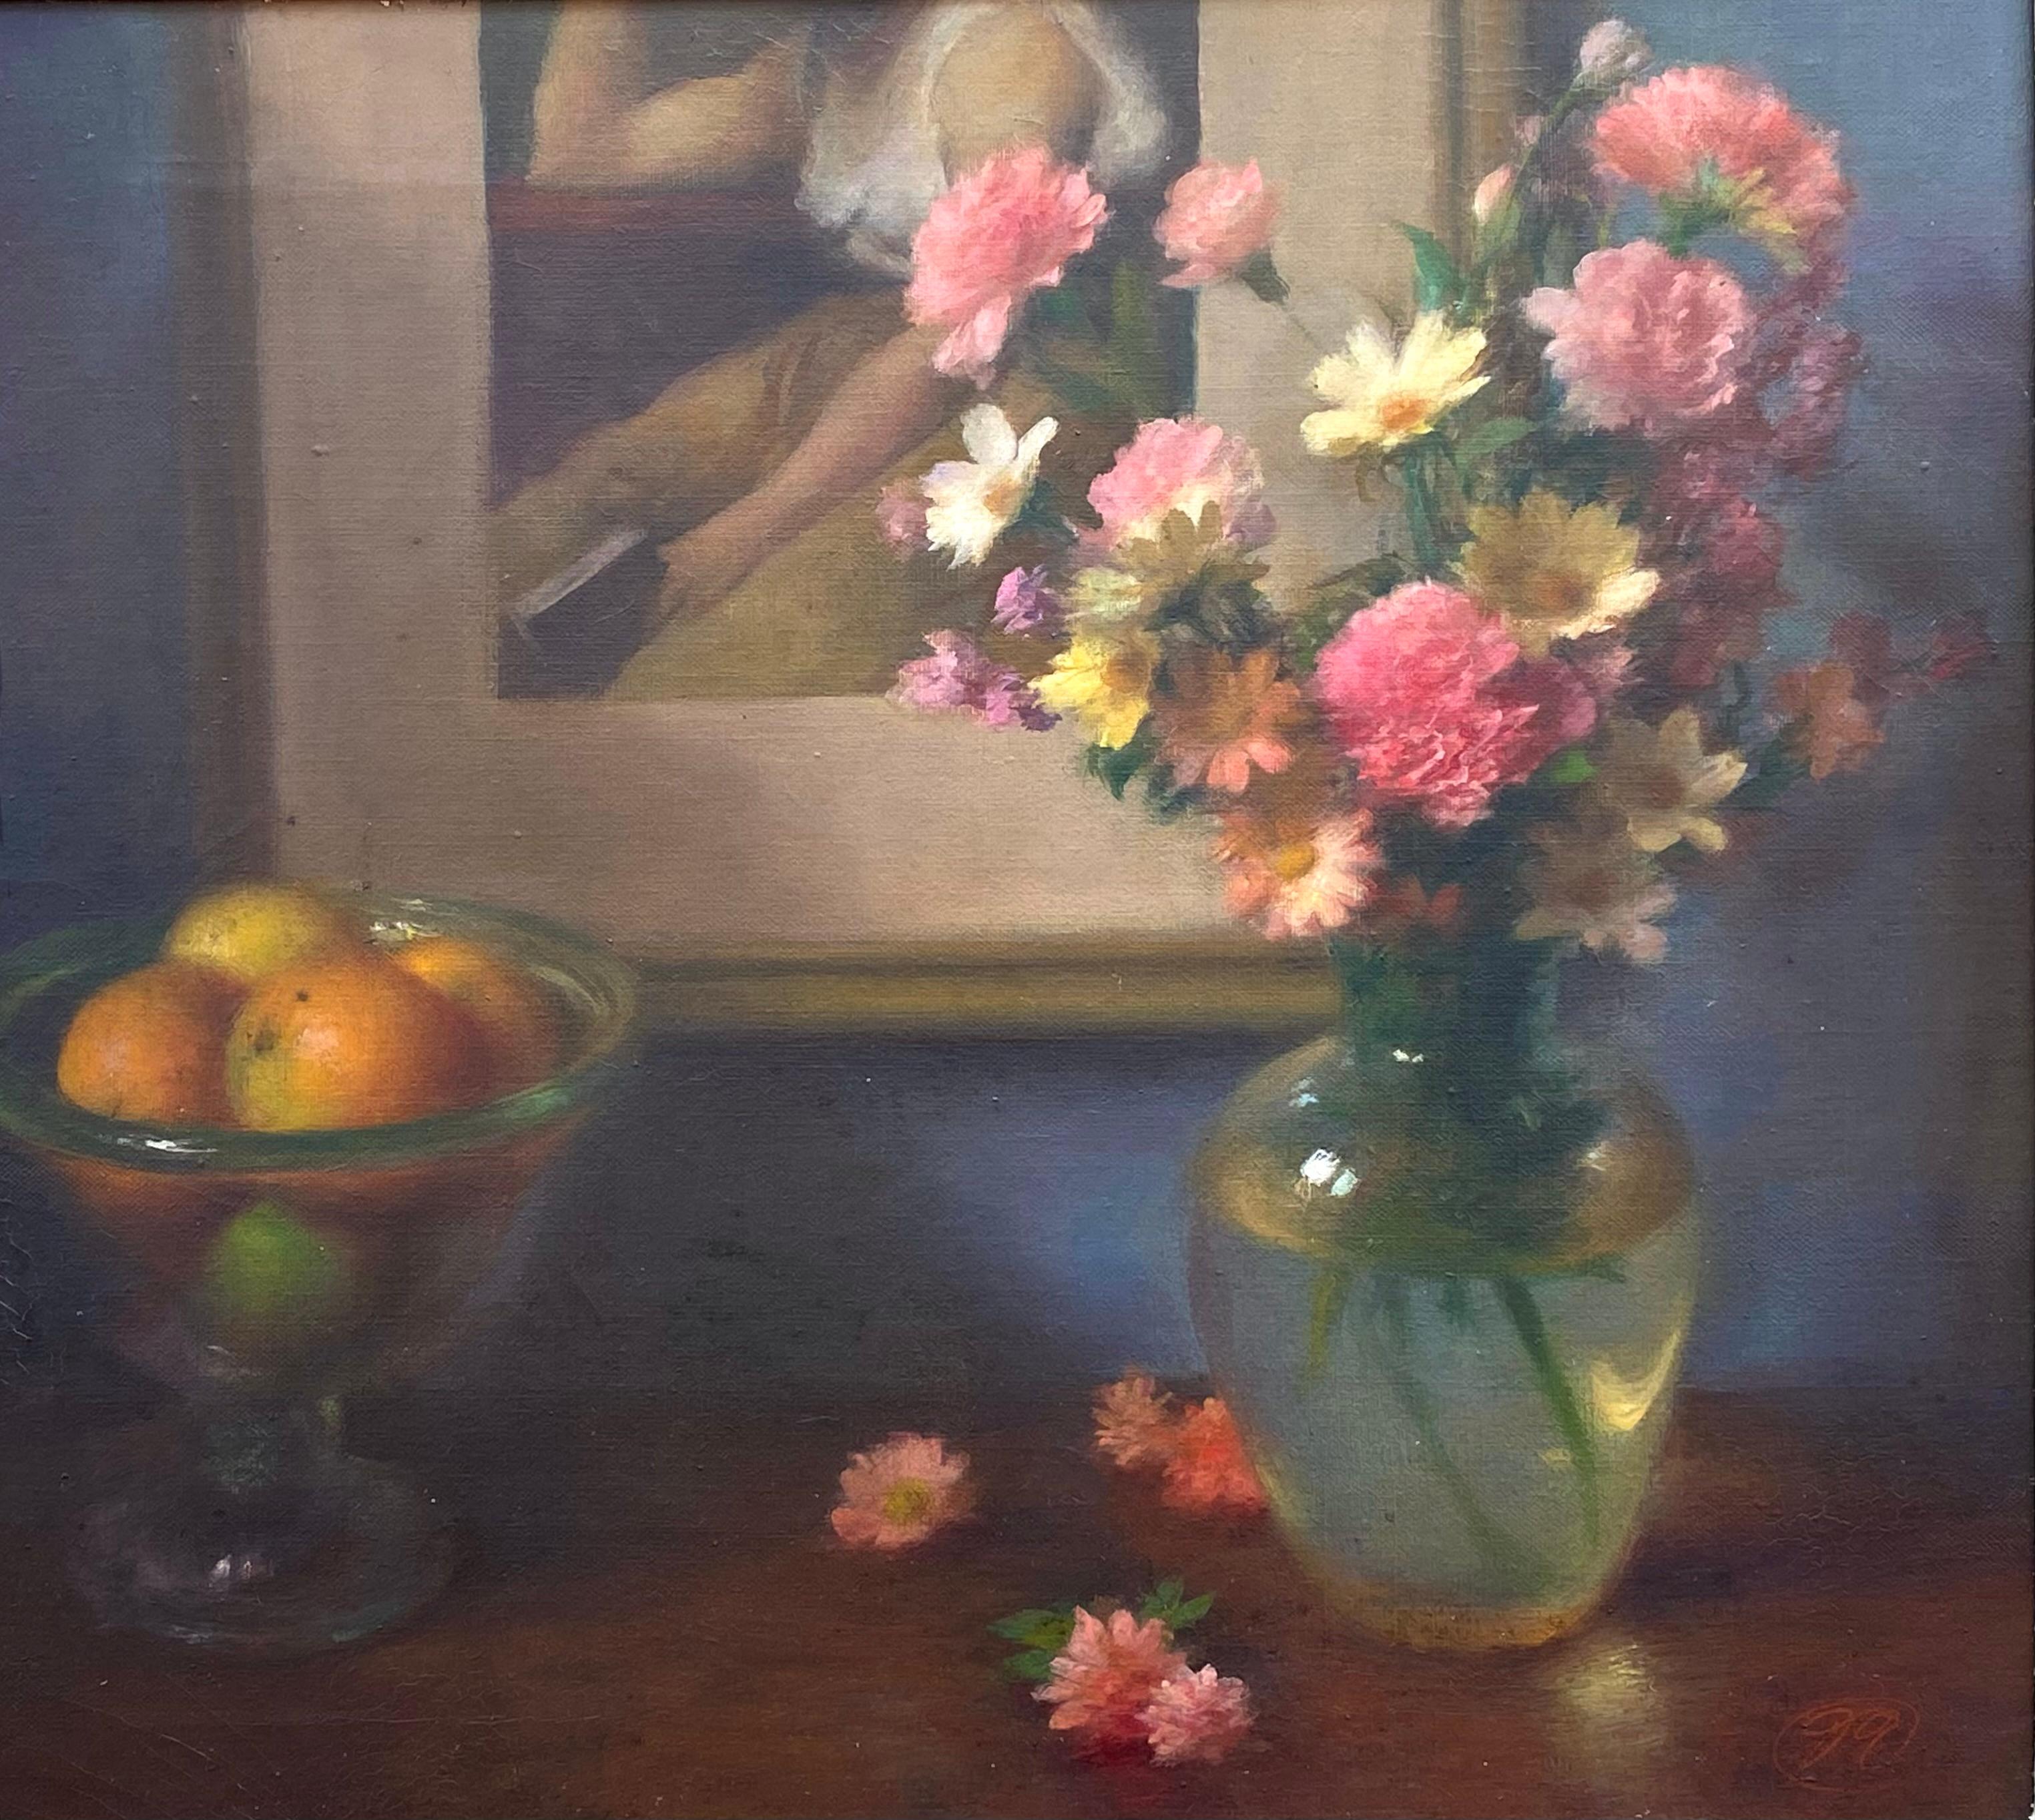 John Russell Still-Life Painting - “Still Life with Flowers and Fruit”